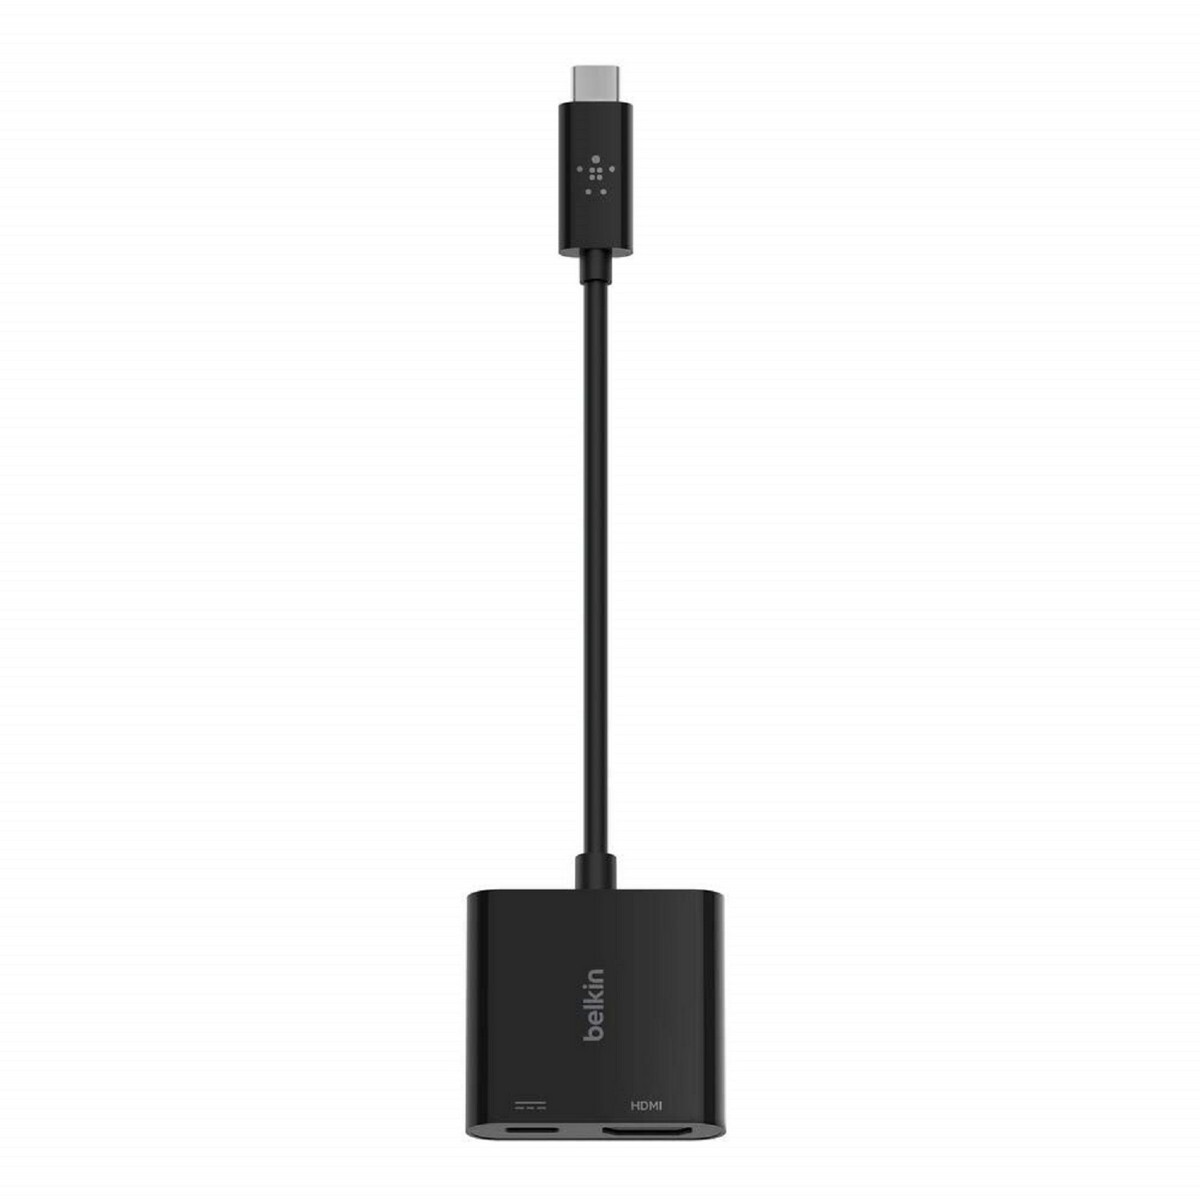 Belkin USB-C to HDMI Charger+Adapter